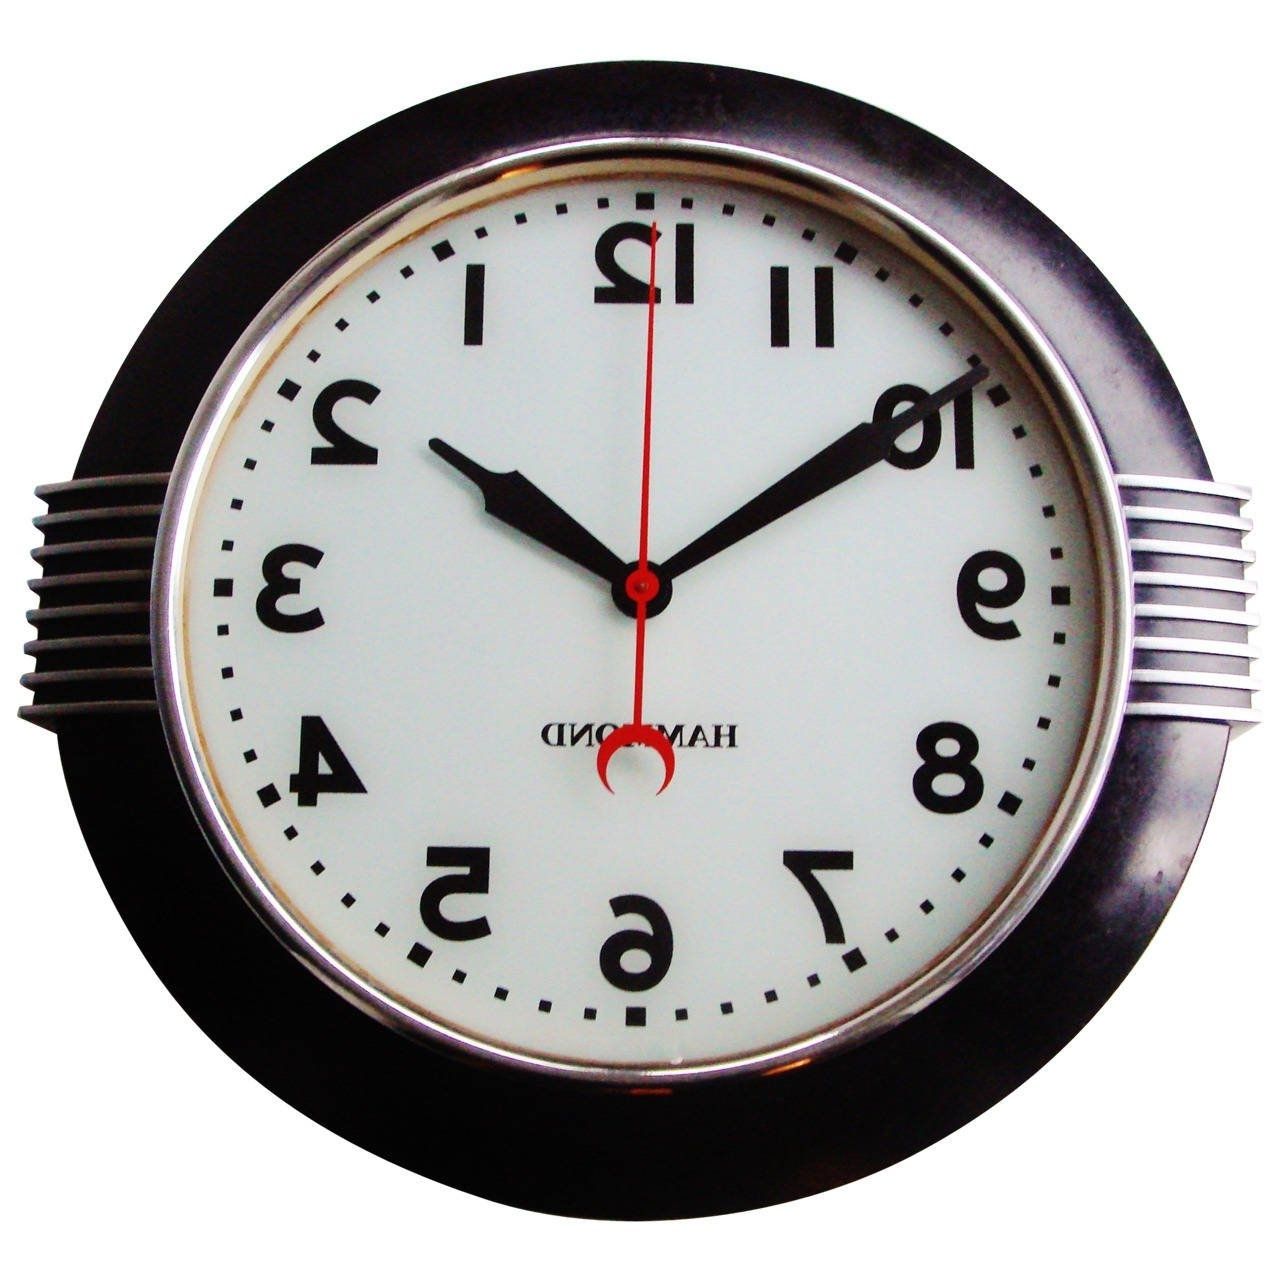 Large American Art Deco Chrome And Black Illuminated Dial Wall Intended For Most Current Large Art Deco Wall Clocks (View 1 of 15)